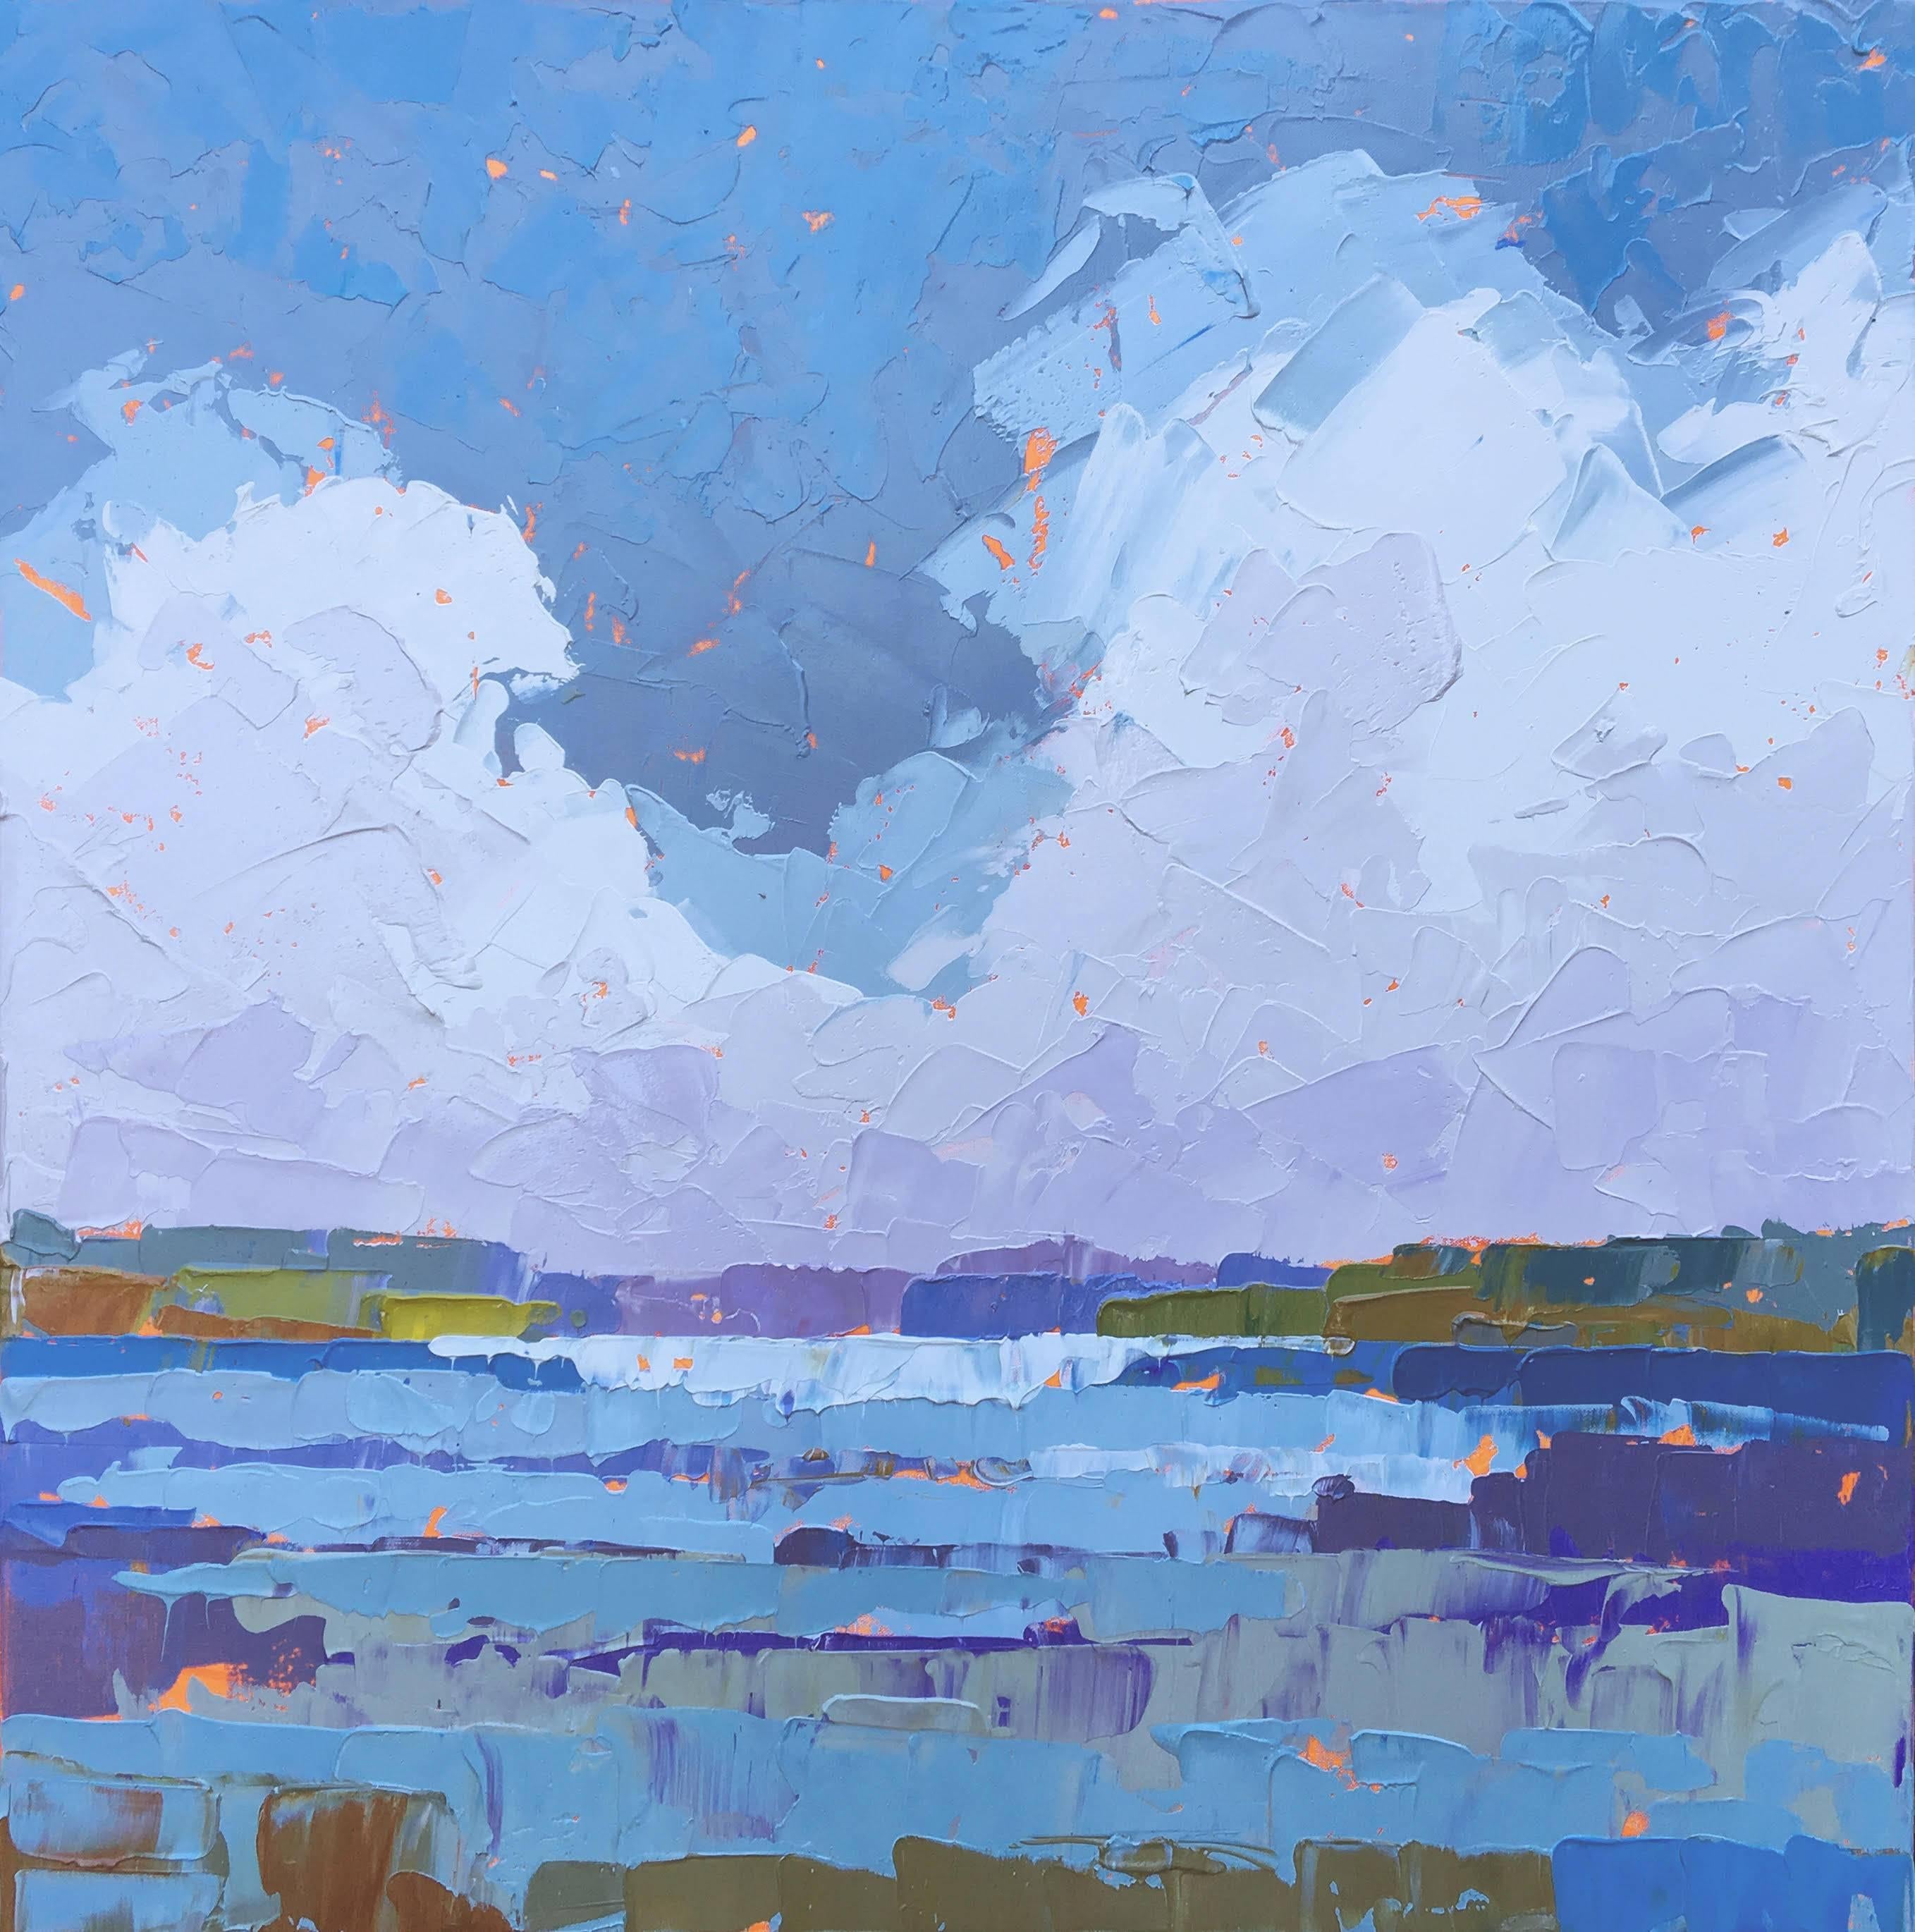 Paul Norwood Landscape Painting - "Climbing Clouds" Painterly Impasto Stormy Seascape in Blues Purples, Cool Hues